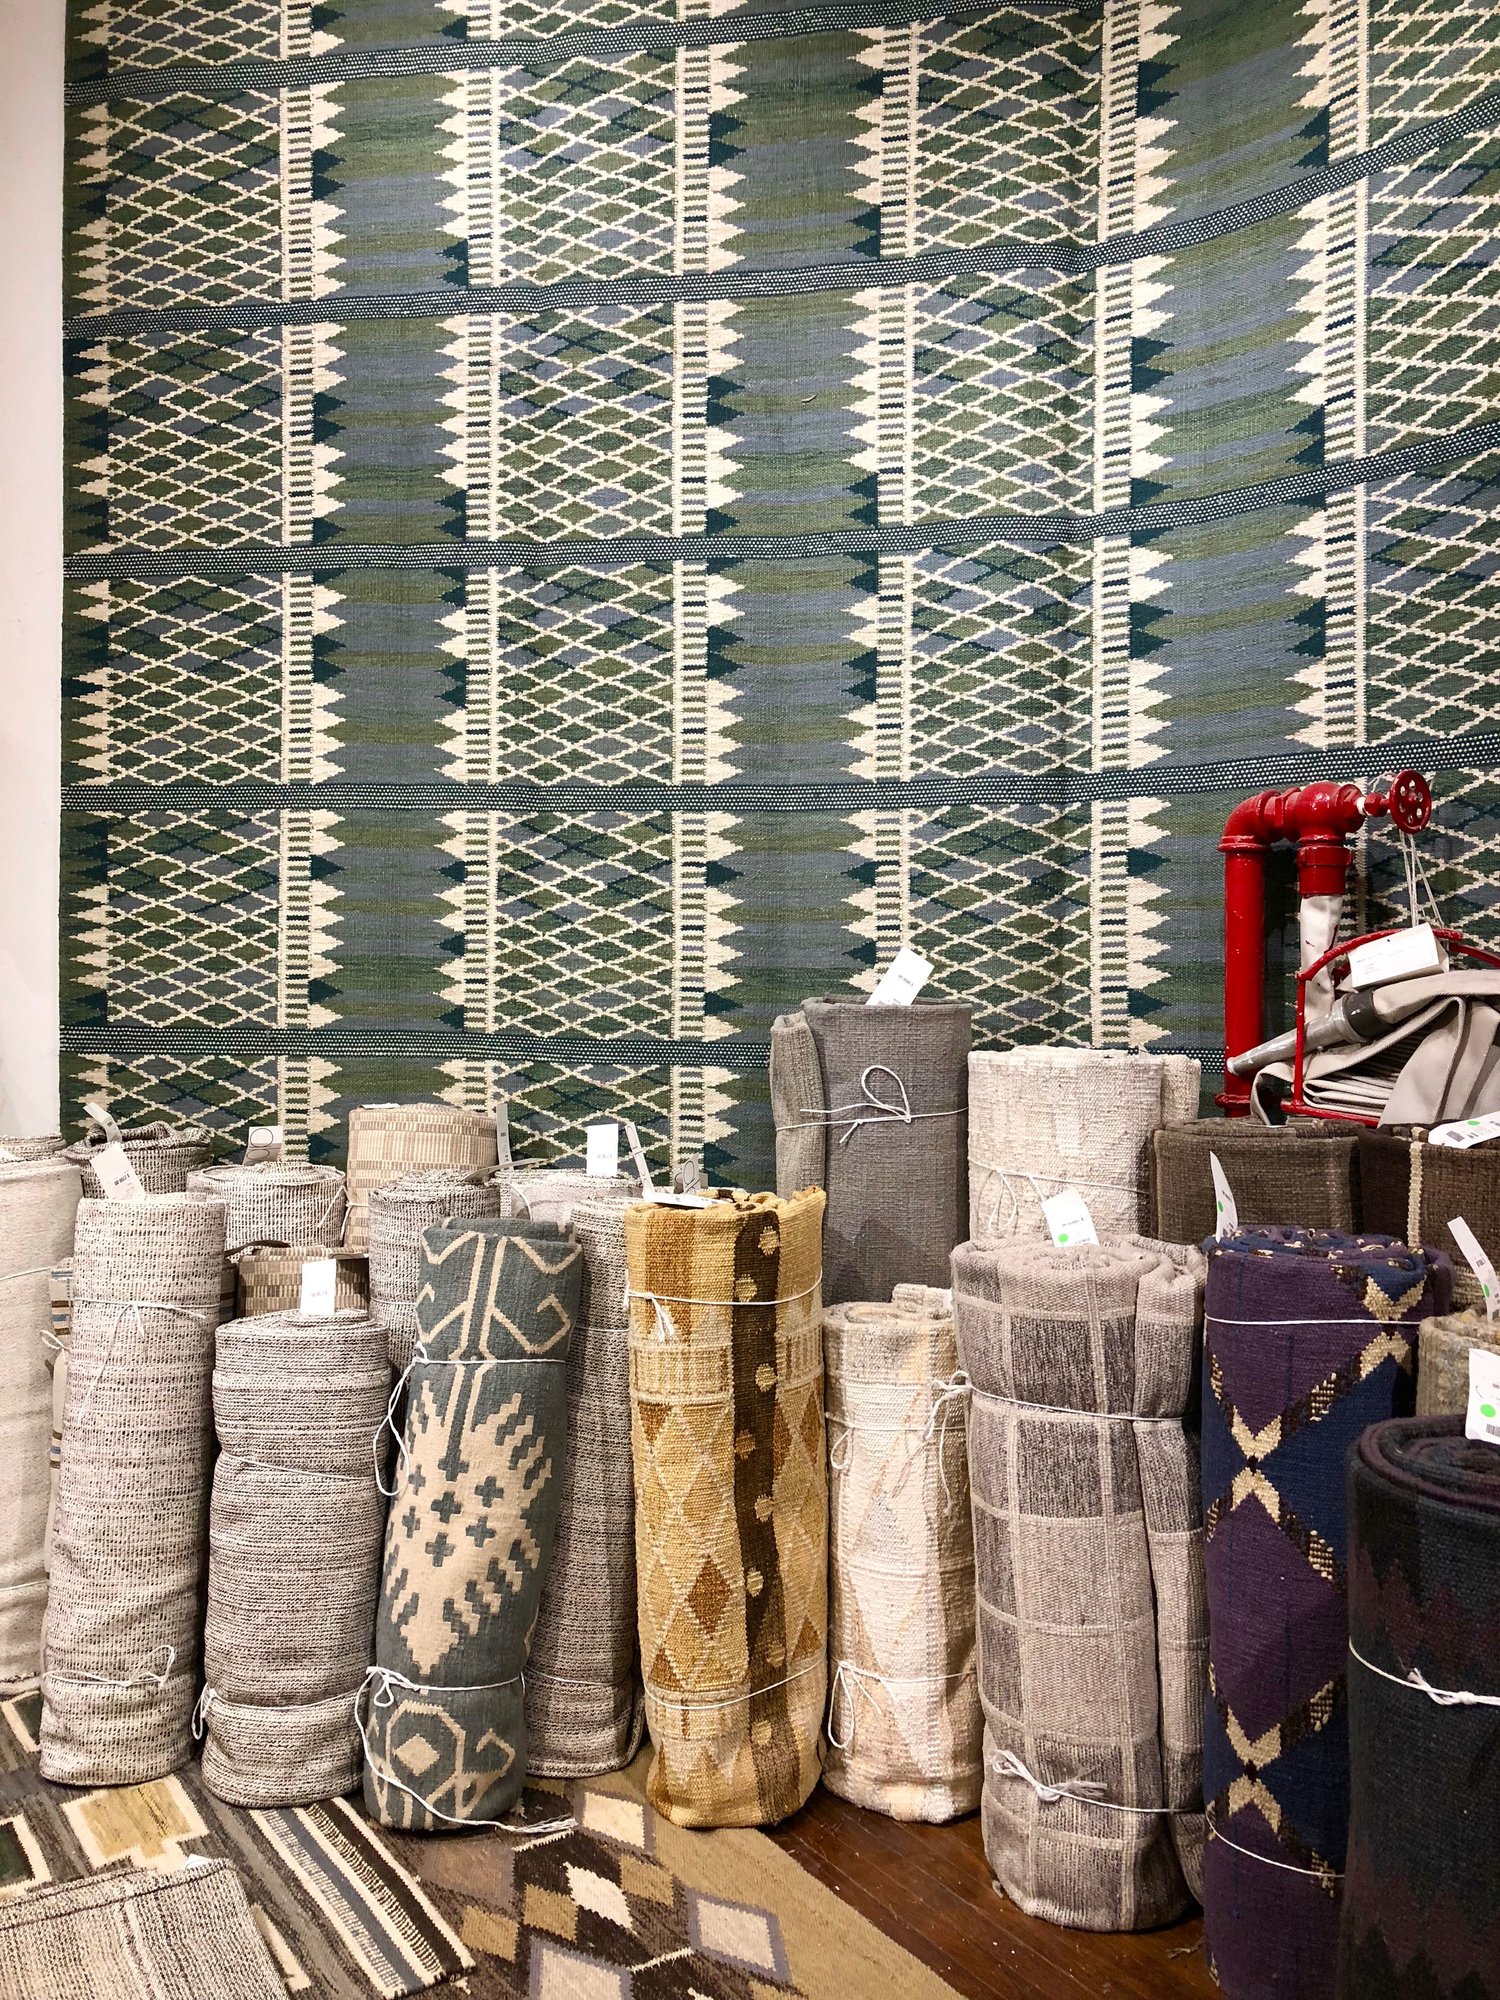 If only my suitcase was bigger -- desperately wanted to adopt all these one-of-a-kind rugs.